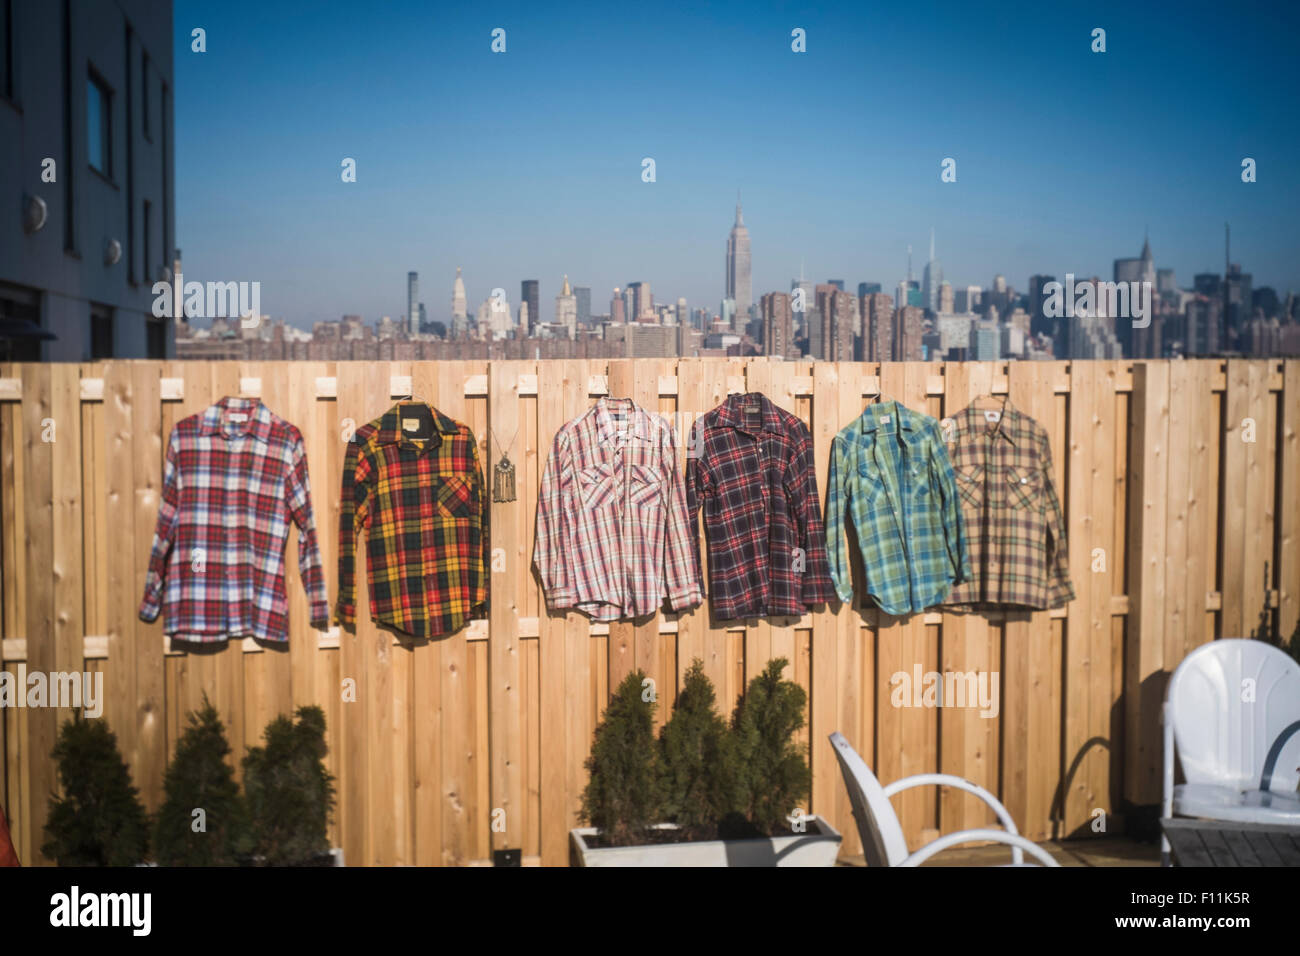 Flannel shirts hanging to dry in urban backyard, New York, New York, United States Stock Photo